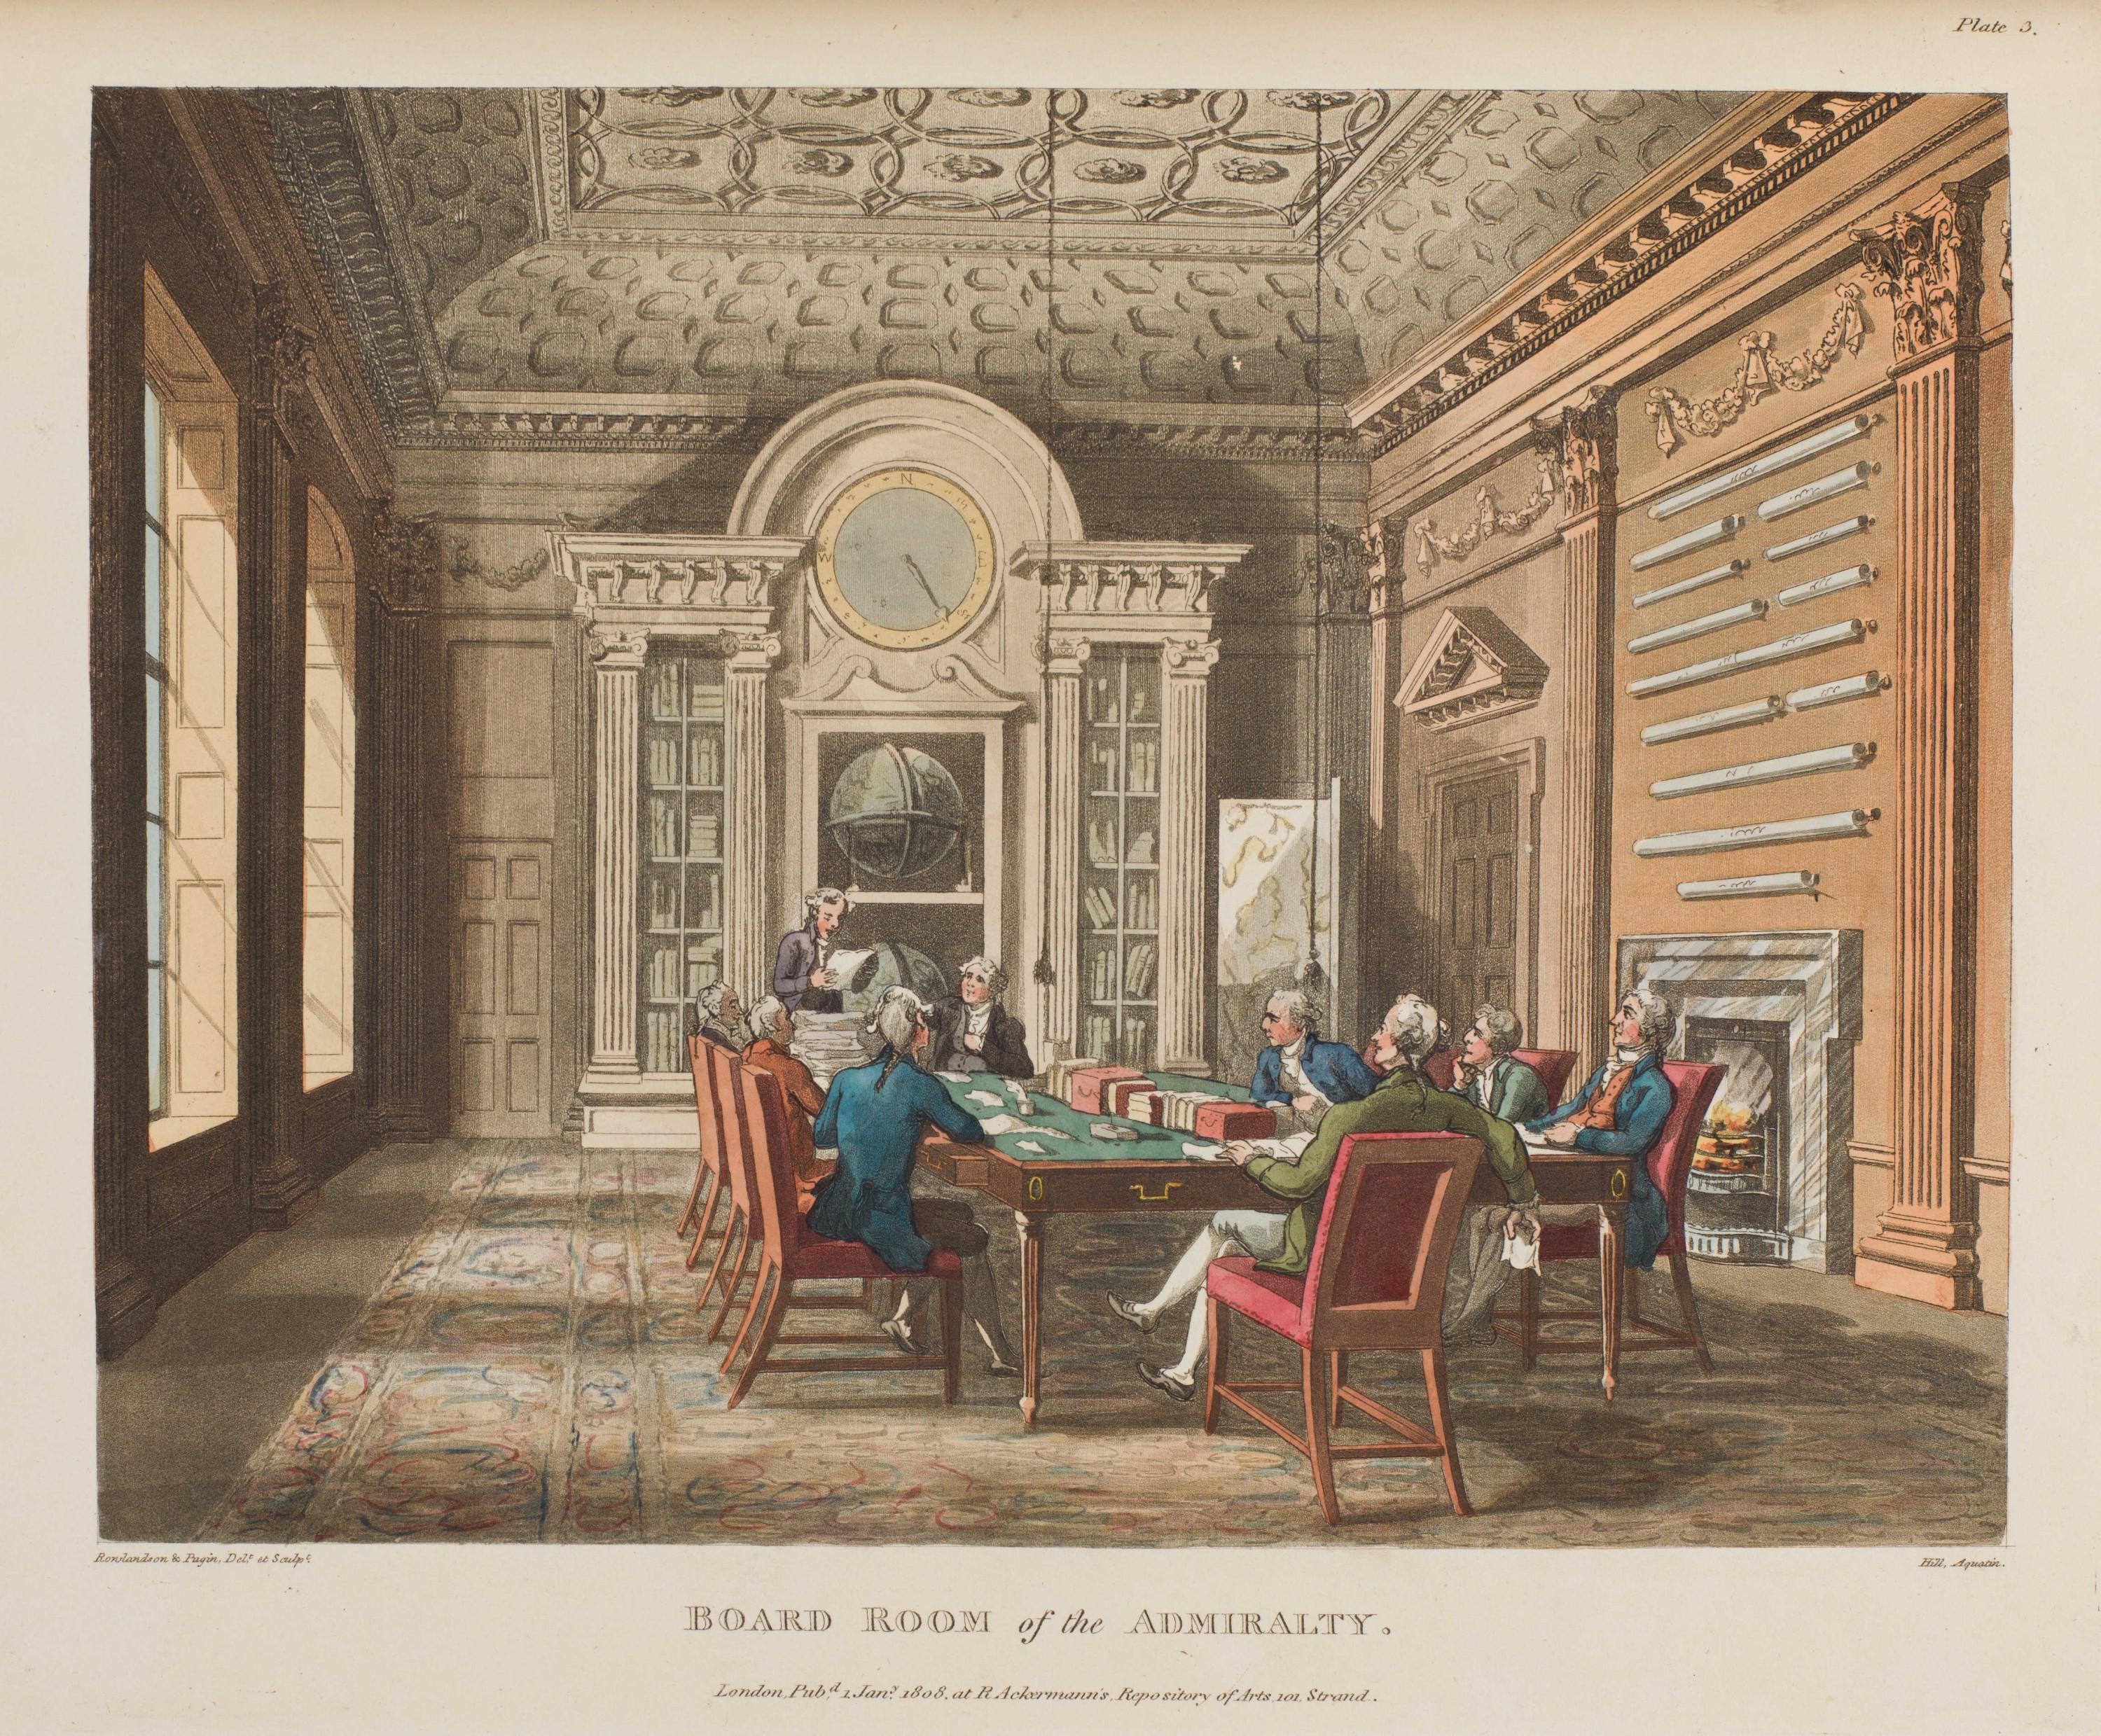 003 - Board Room of the Admiralty